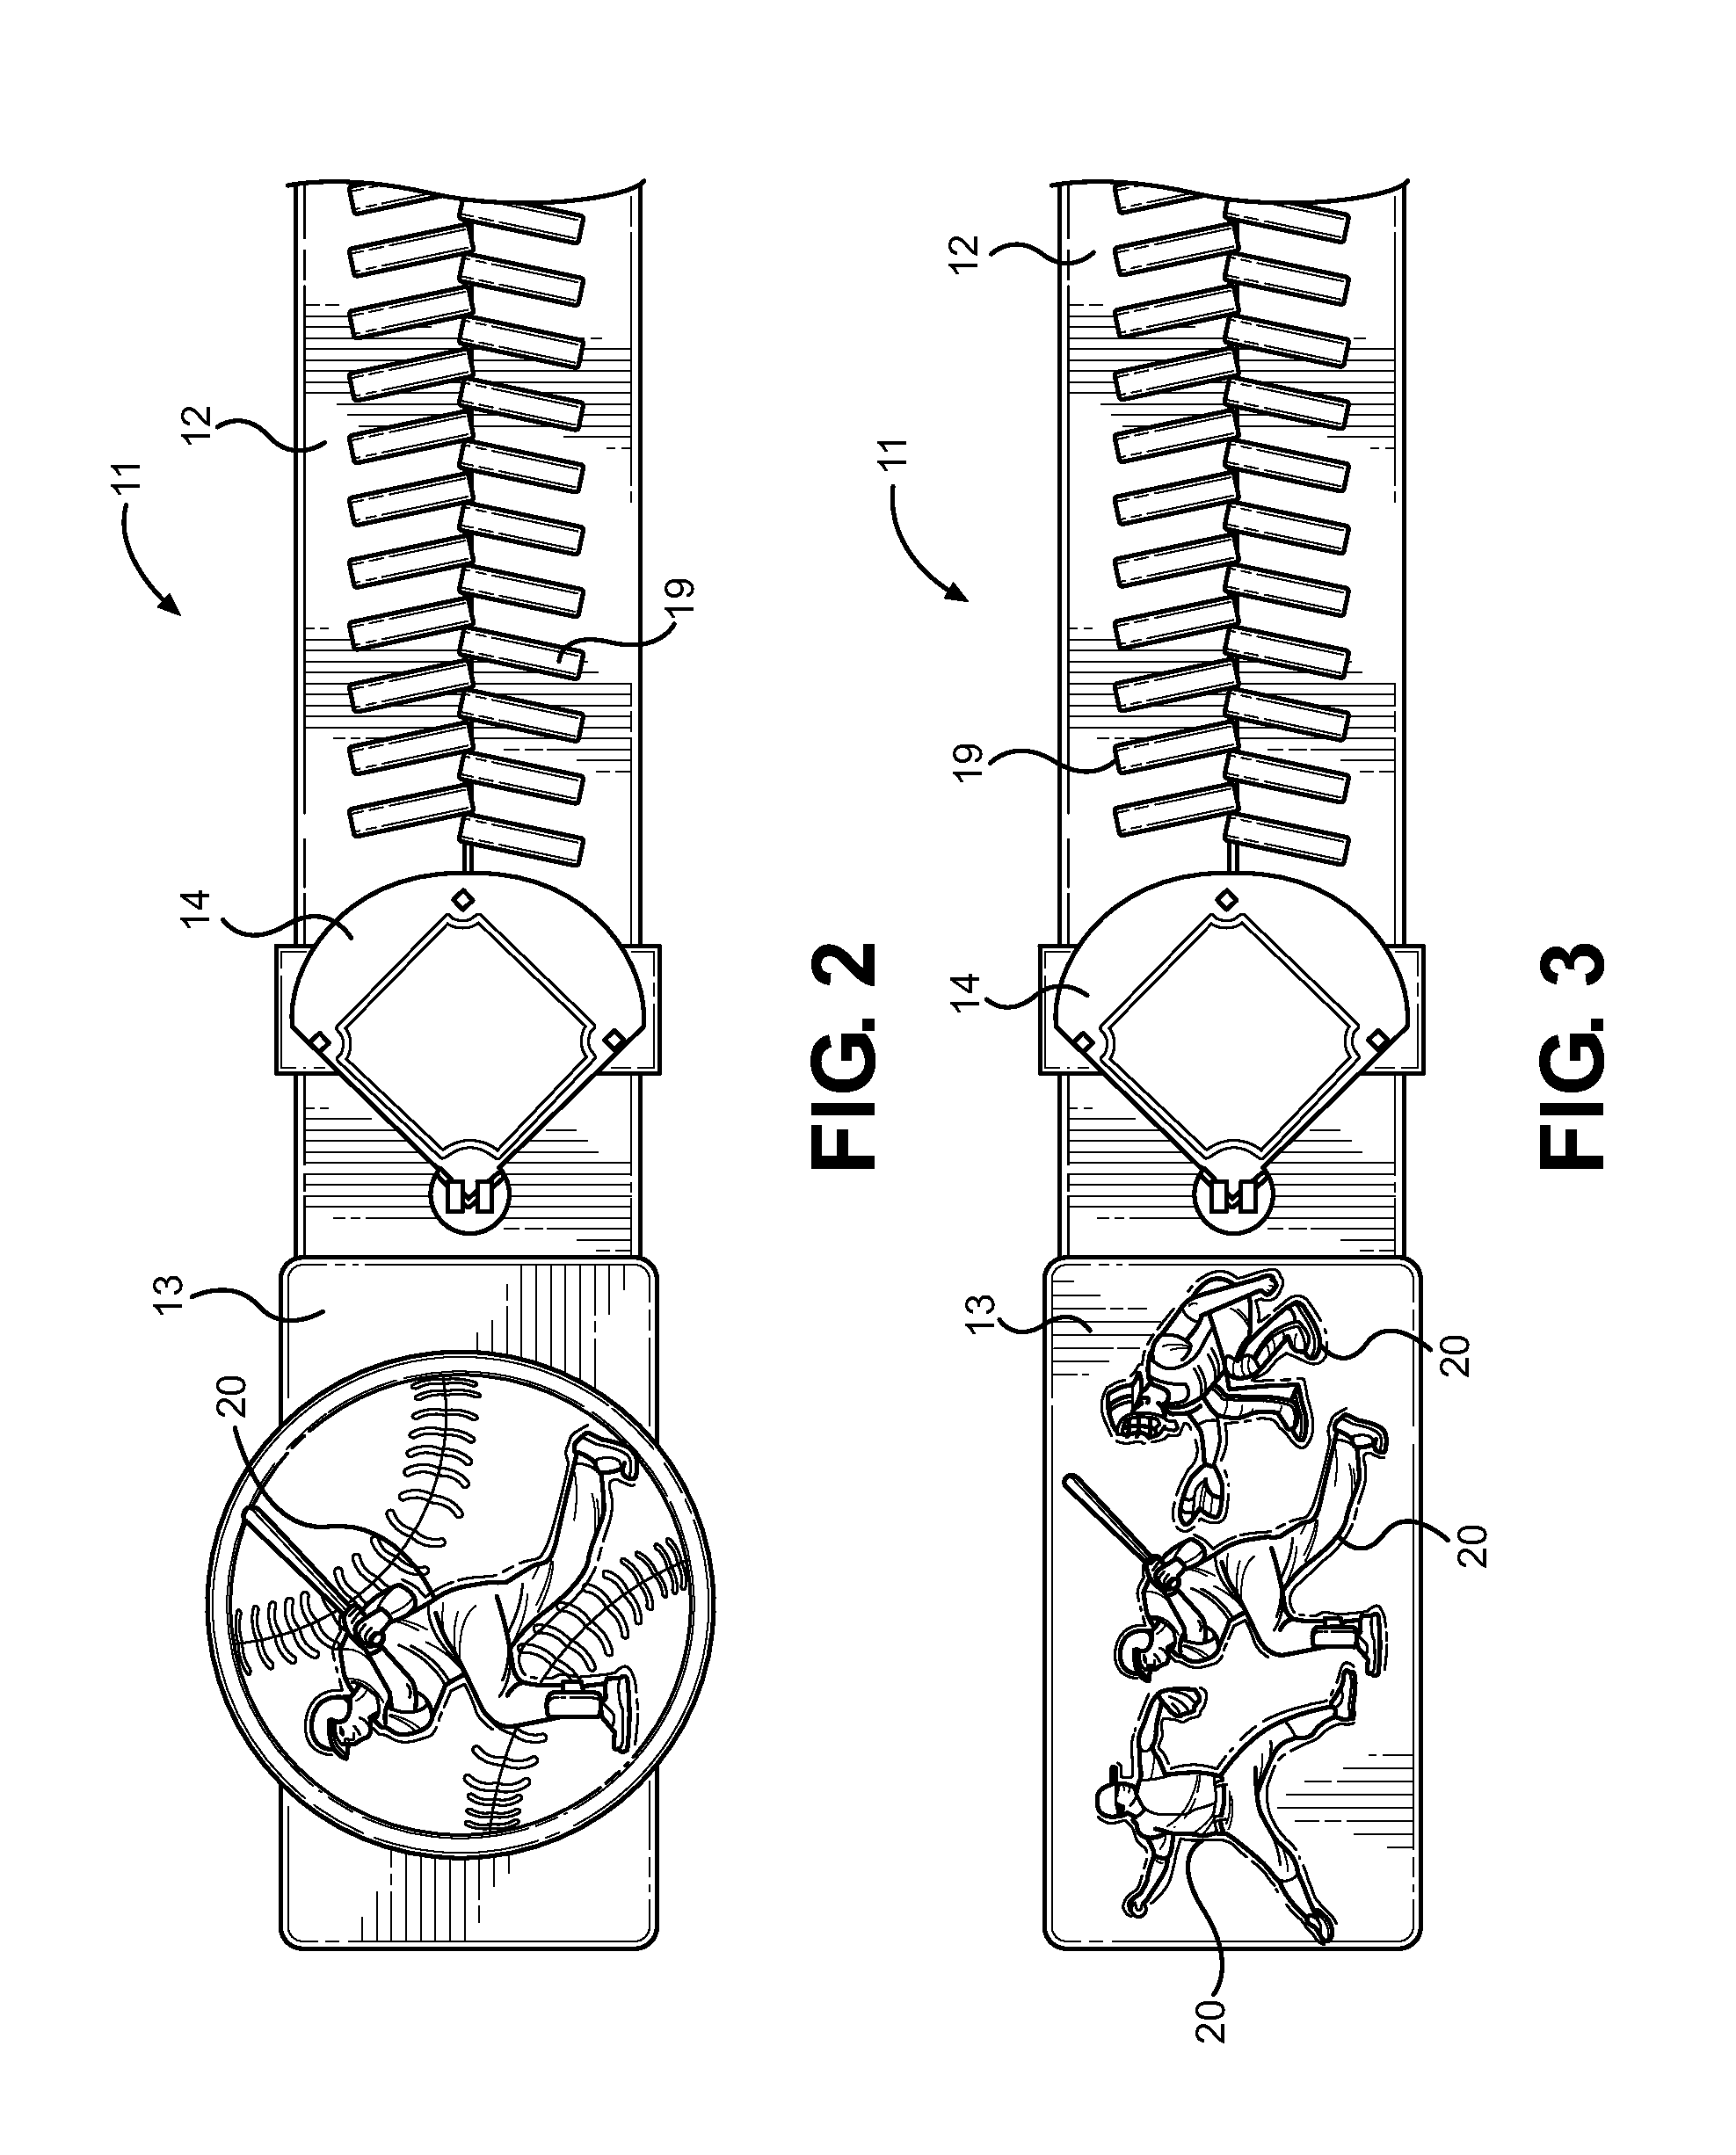 Sports Themed Belts and Method of Construction